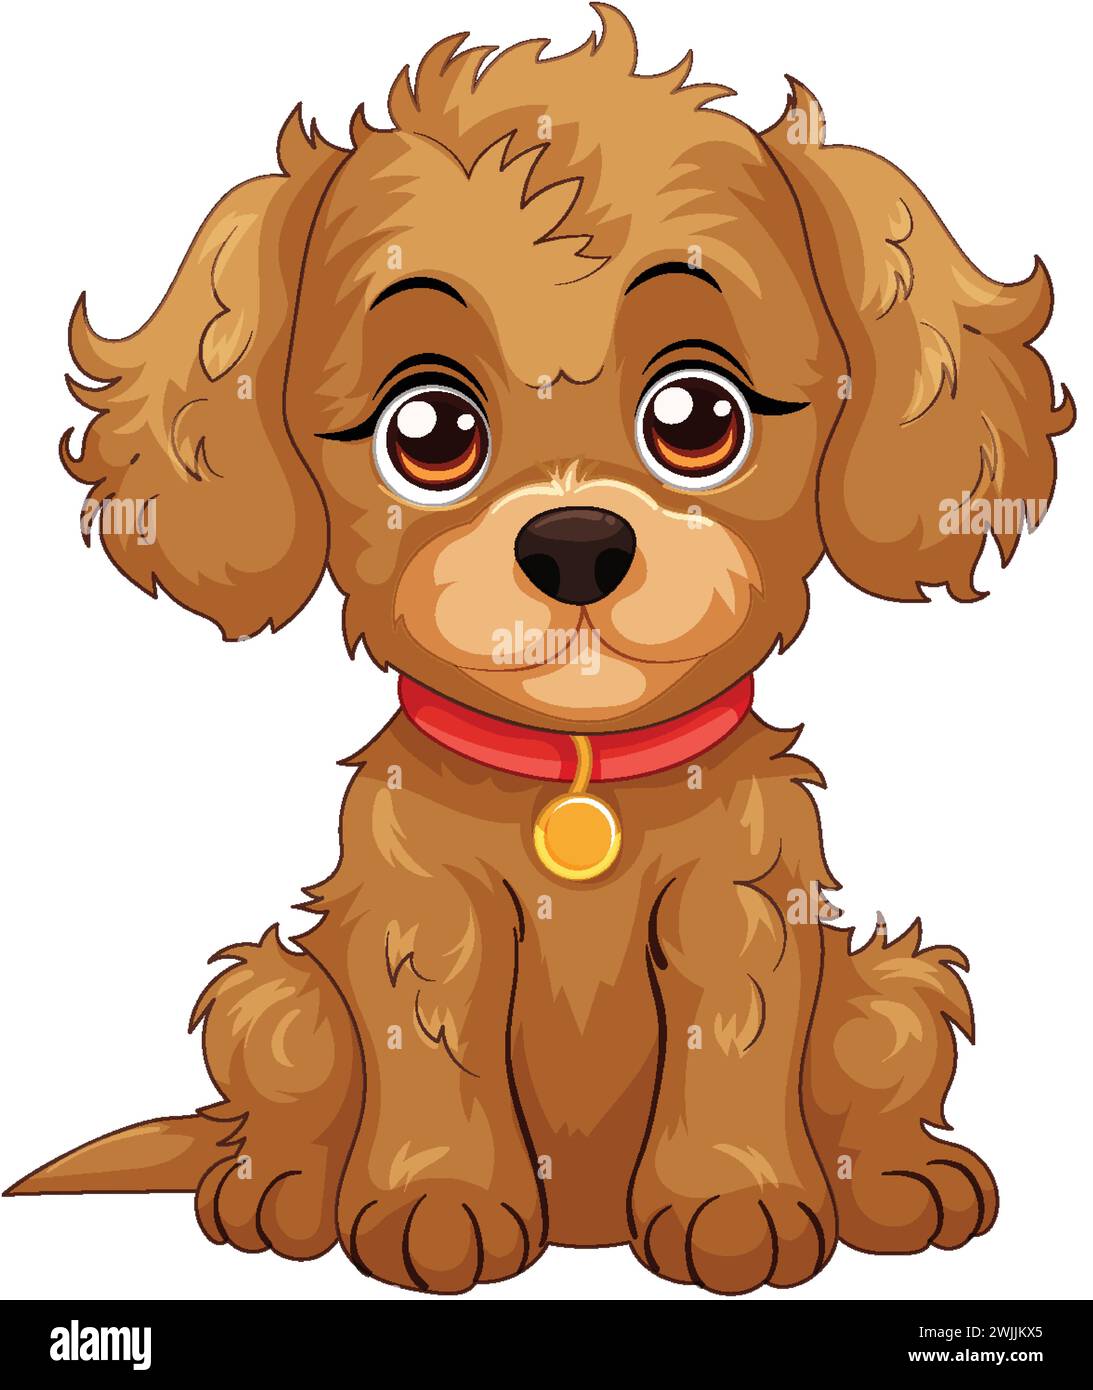 Cute cartoon puppy sitting with a red collar Stock Vector